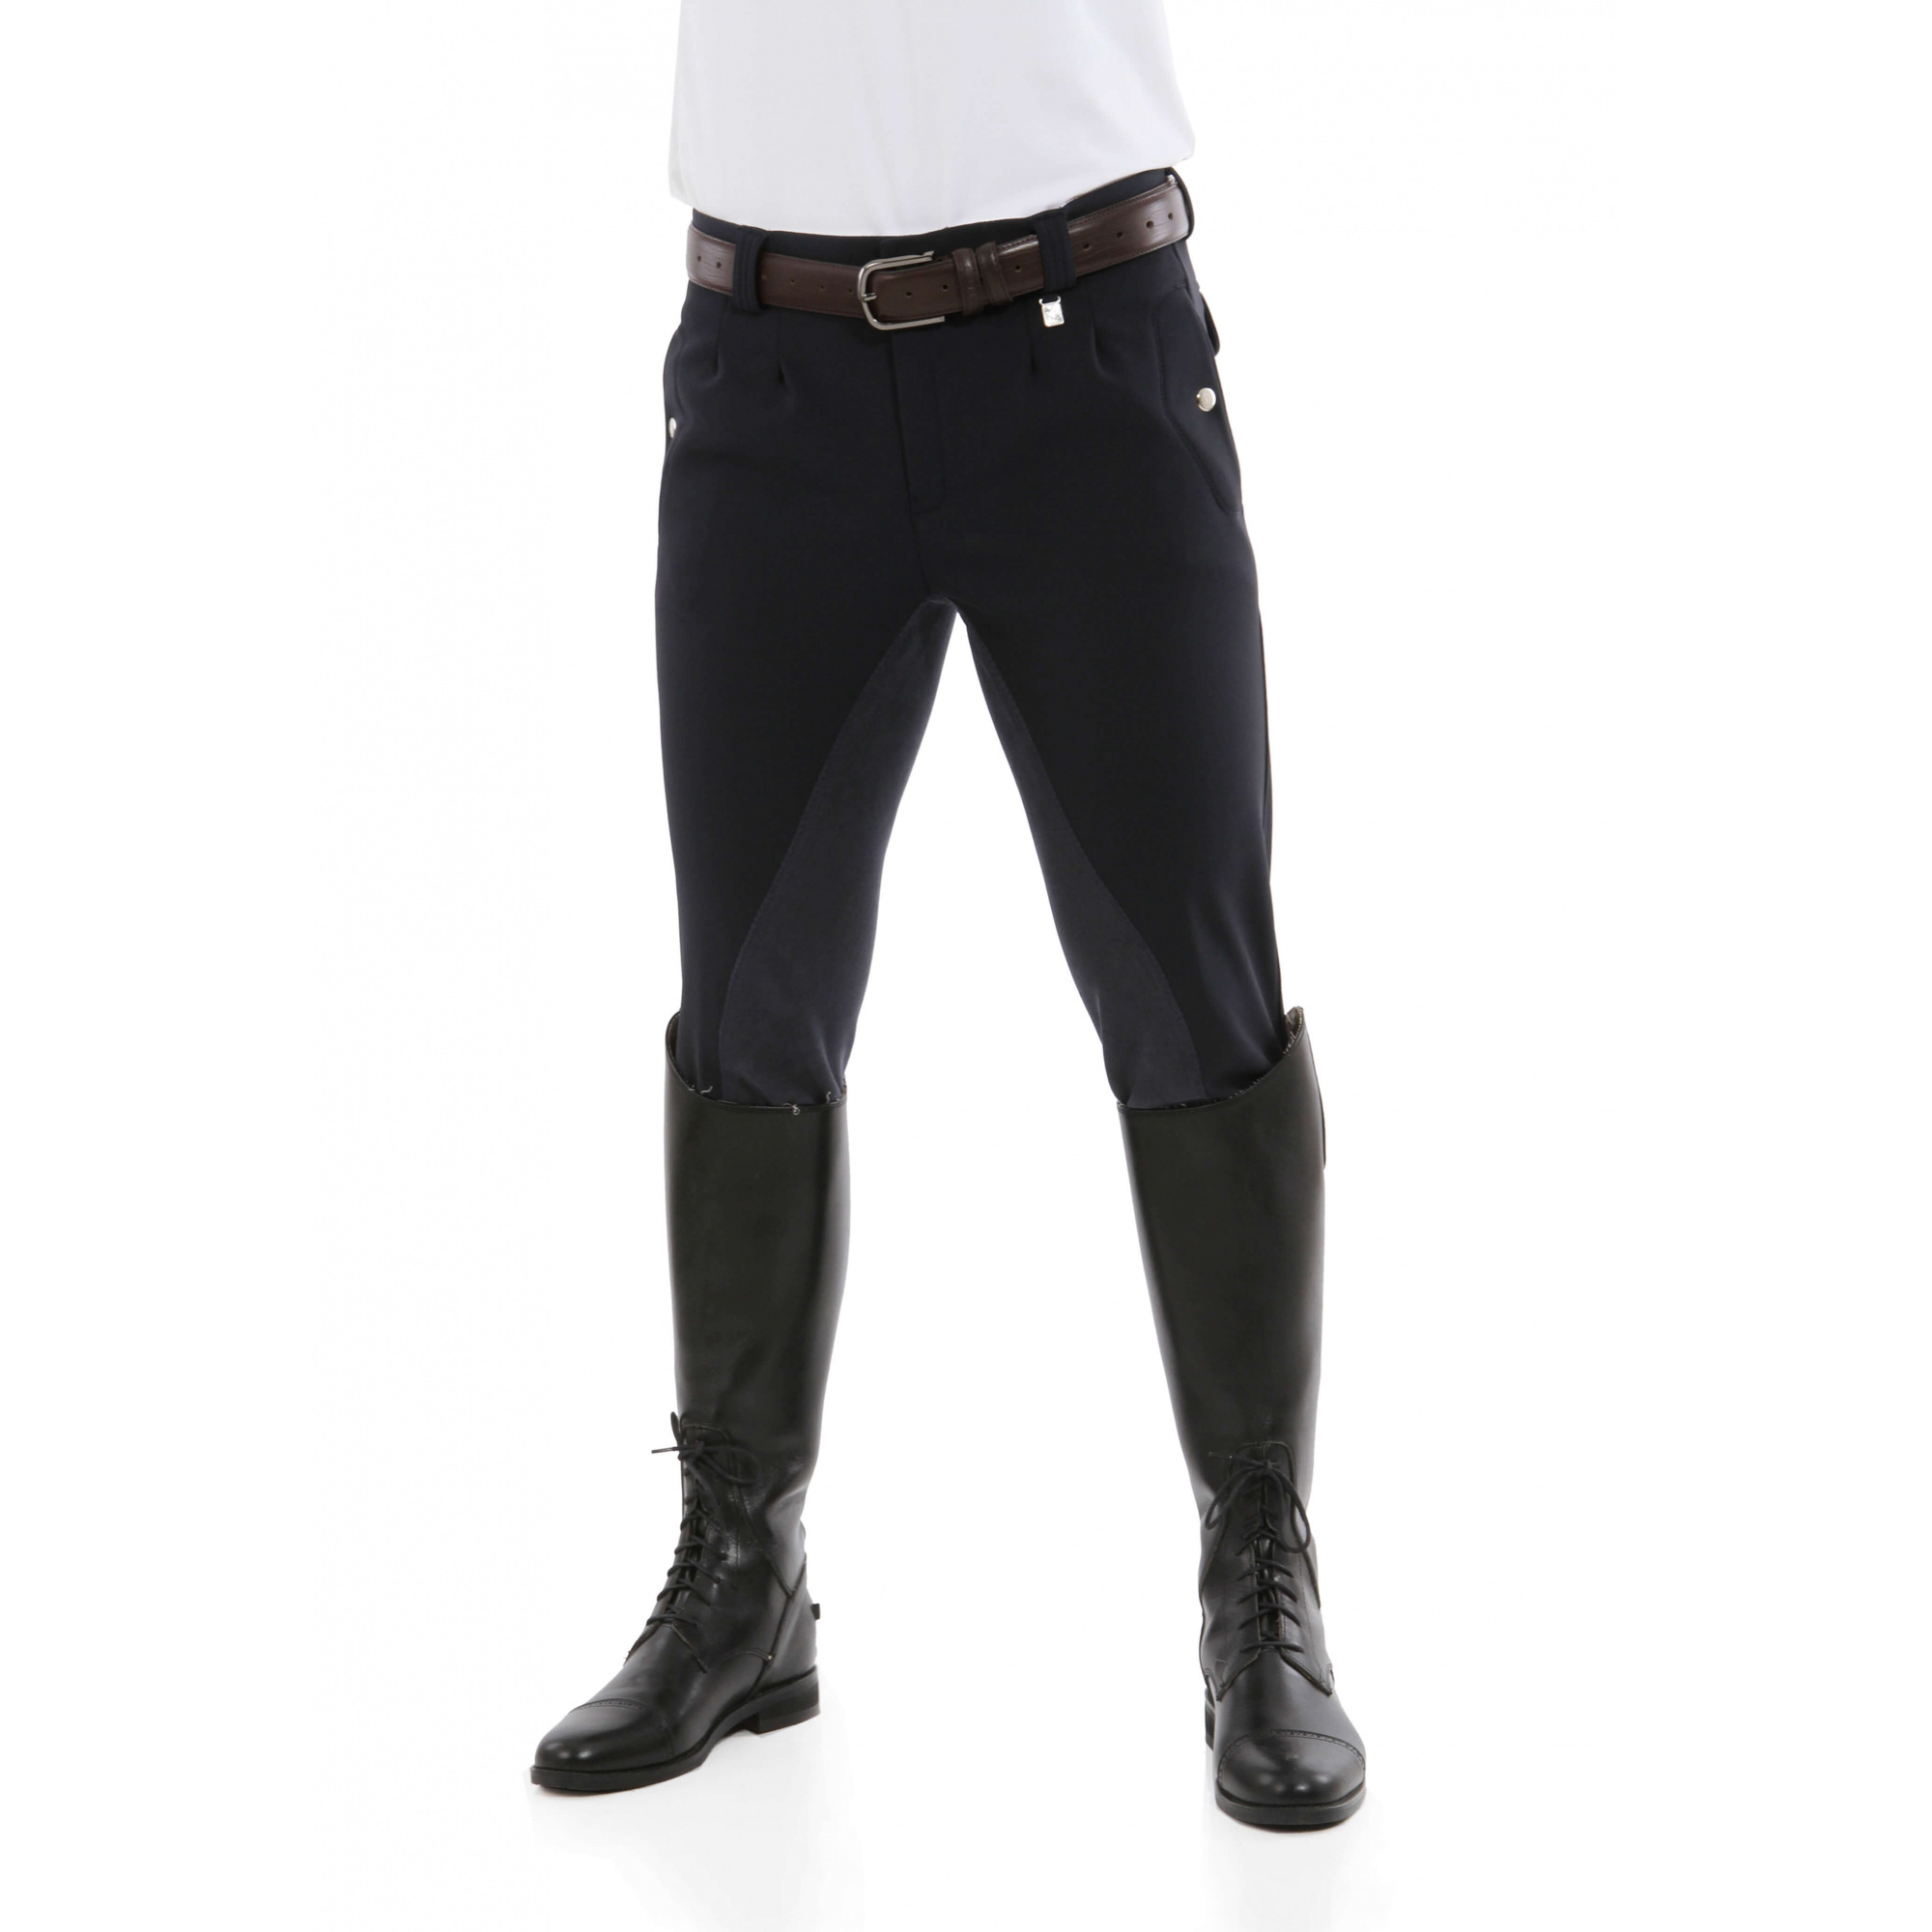 Kingsland LANCE WINTER MEN'S BREECHES WITH LEATHER FULL SEAT - EQUISHOP ...